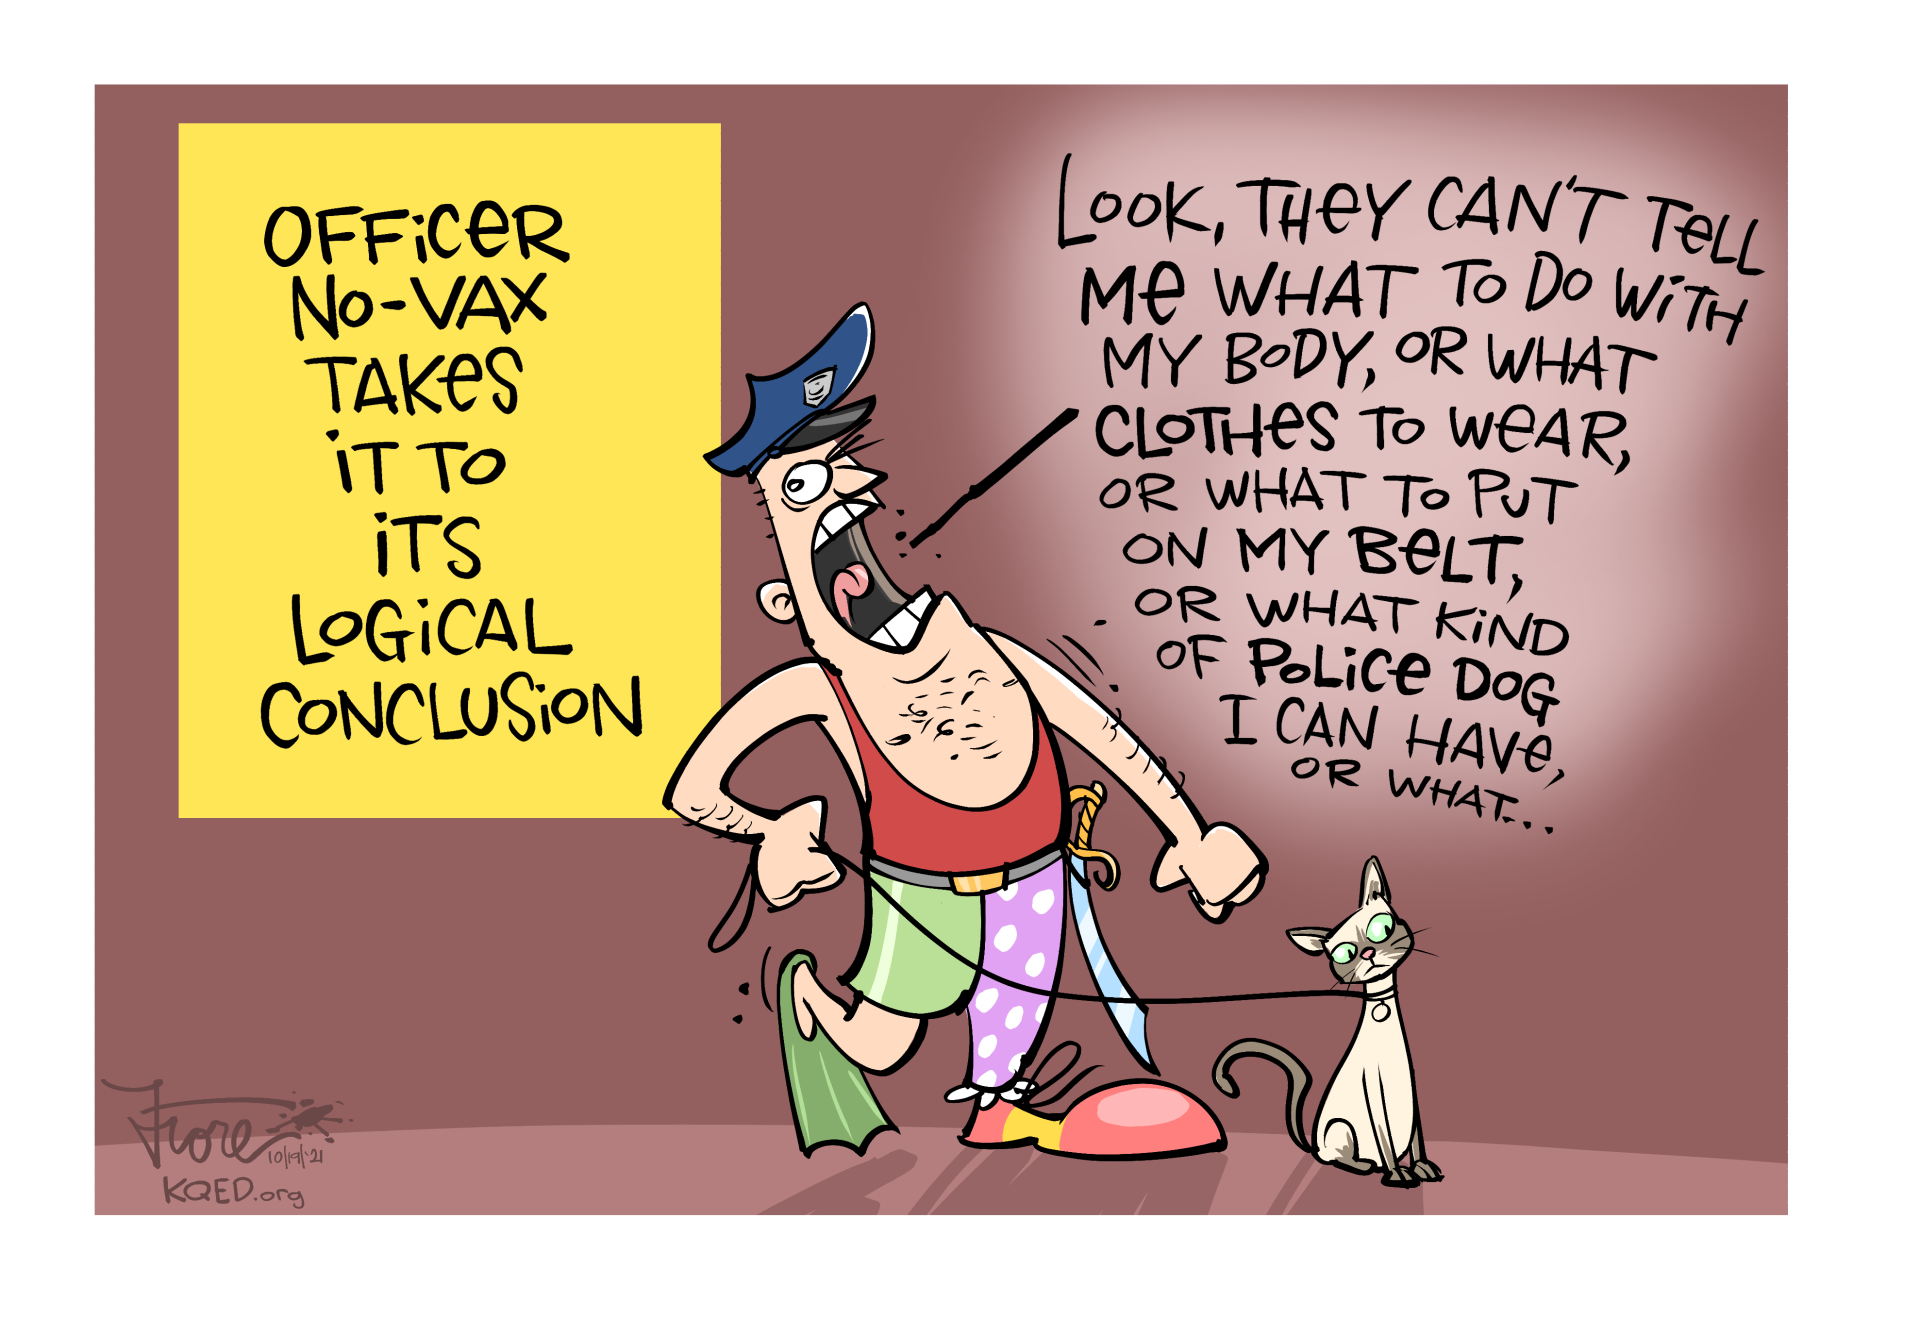 Cartoon: "Officer No-Vax takes it to its logical conclusion." A man in a police hat dressed in circus-type gear and holding a cat on a leash says, "look, they can't tell me what to do with my body...or what kind of police dog I can have..."